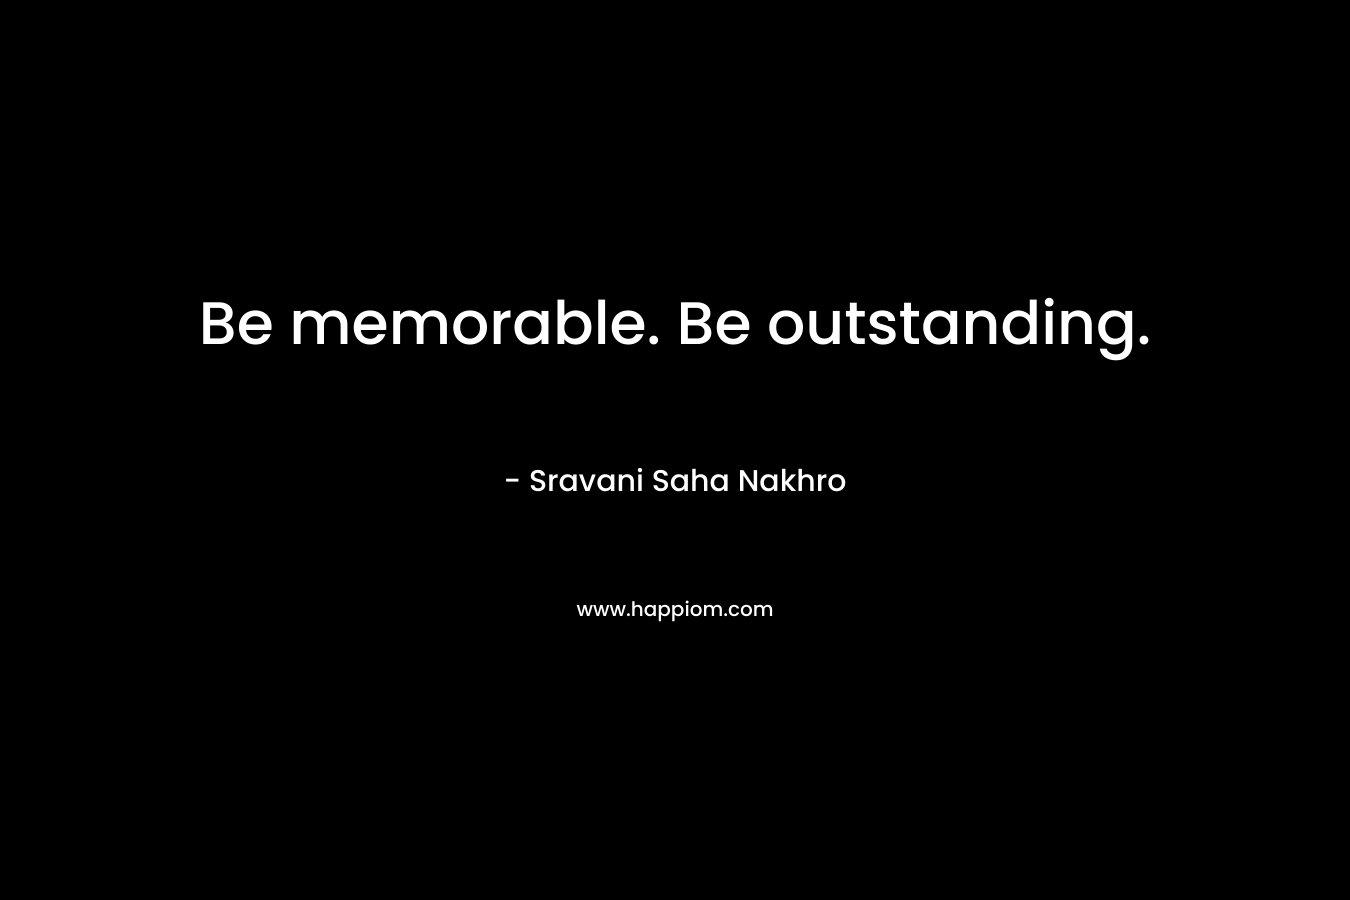 Be memorable. Be outstanding.